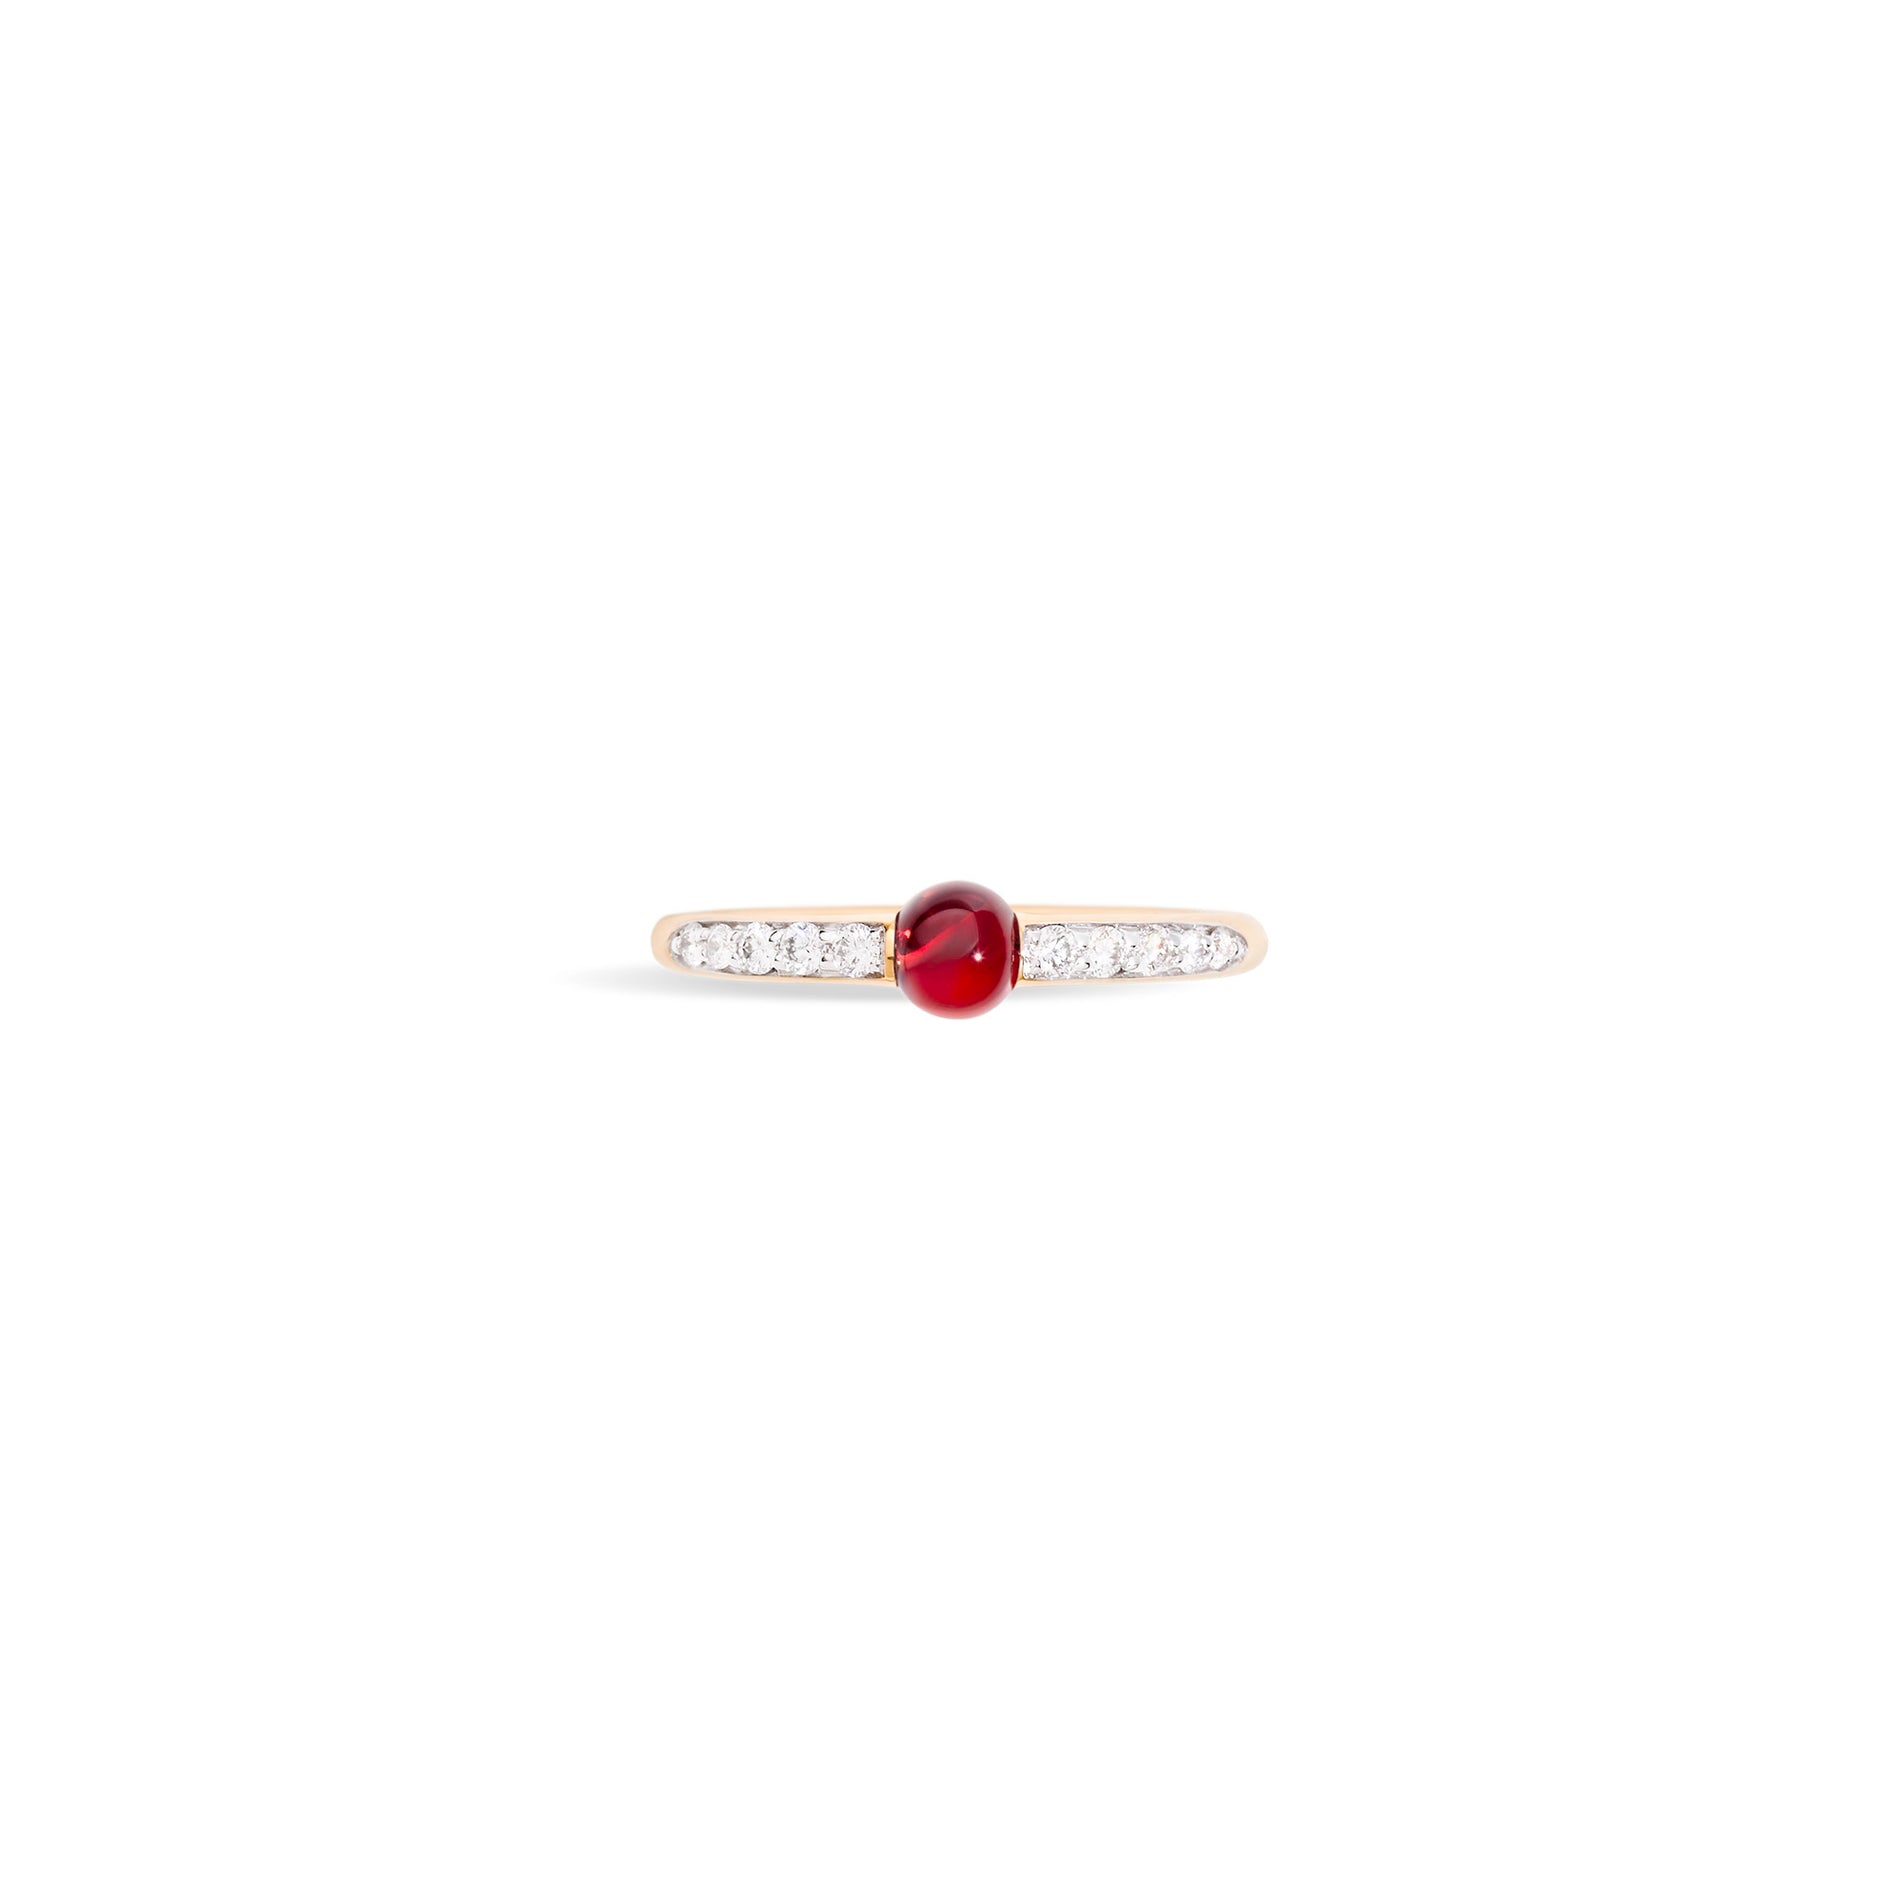 M'ama Non M'ama Ring in 18k Rose Gold with Garnet Ring and Diamonds - Orsini Jewellers NZ